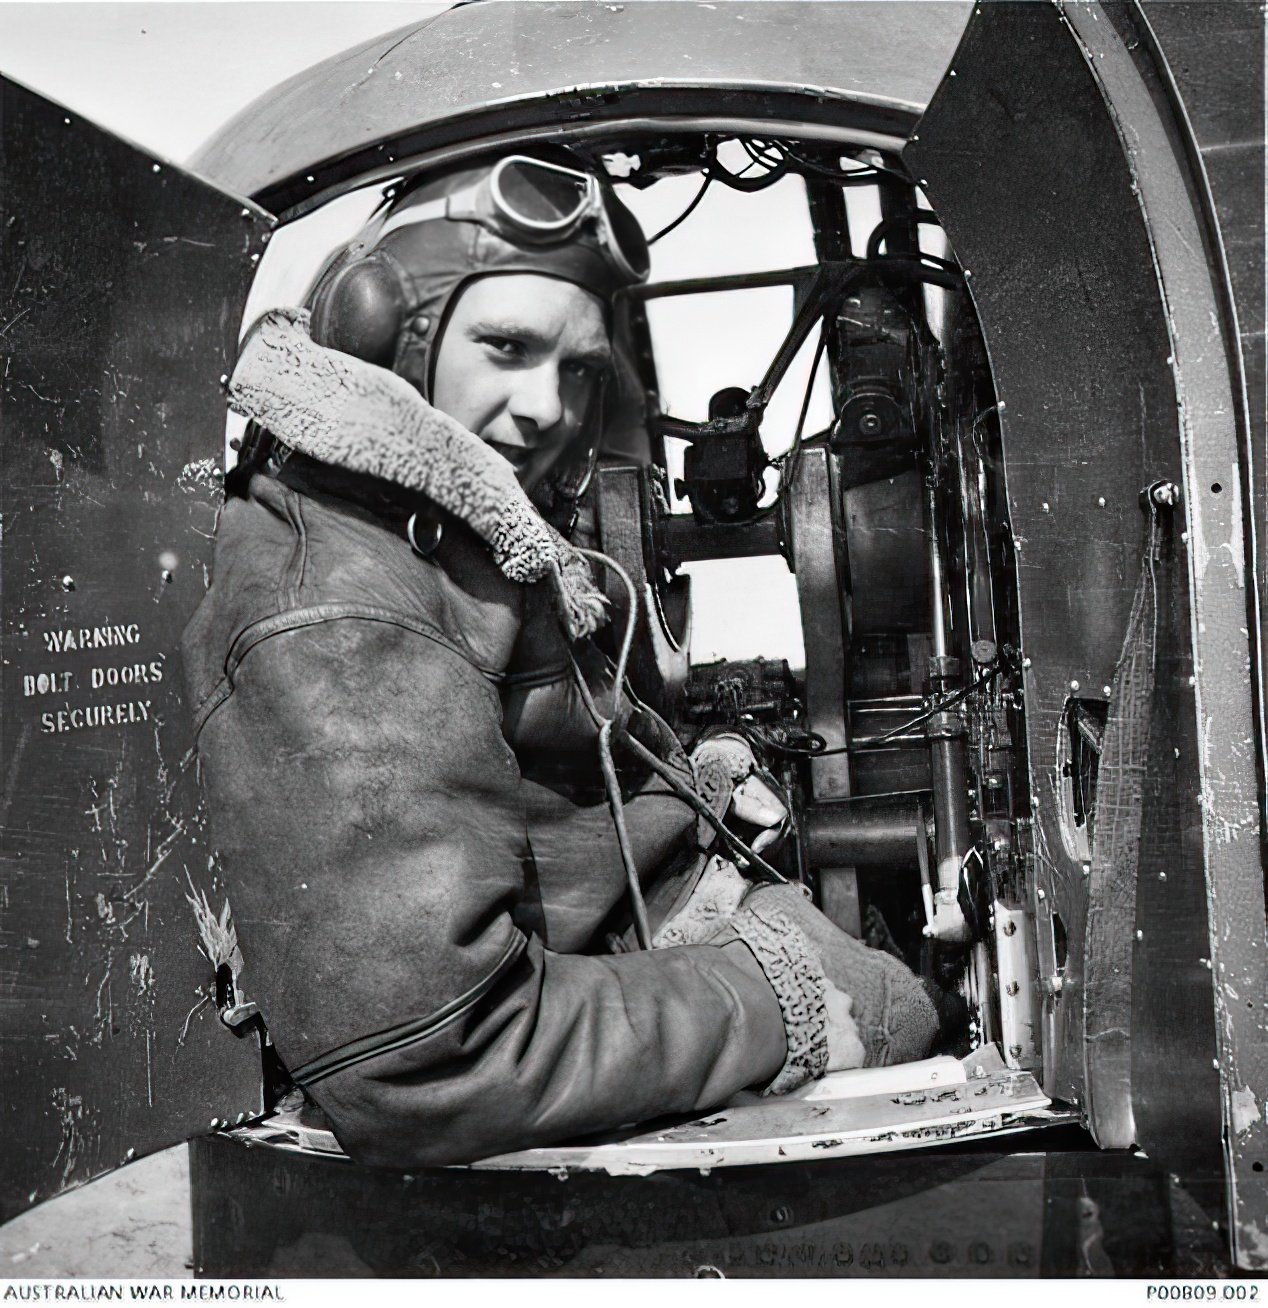 RAF rear gunner Scotty in turret of Wellington bomber aircraft